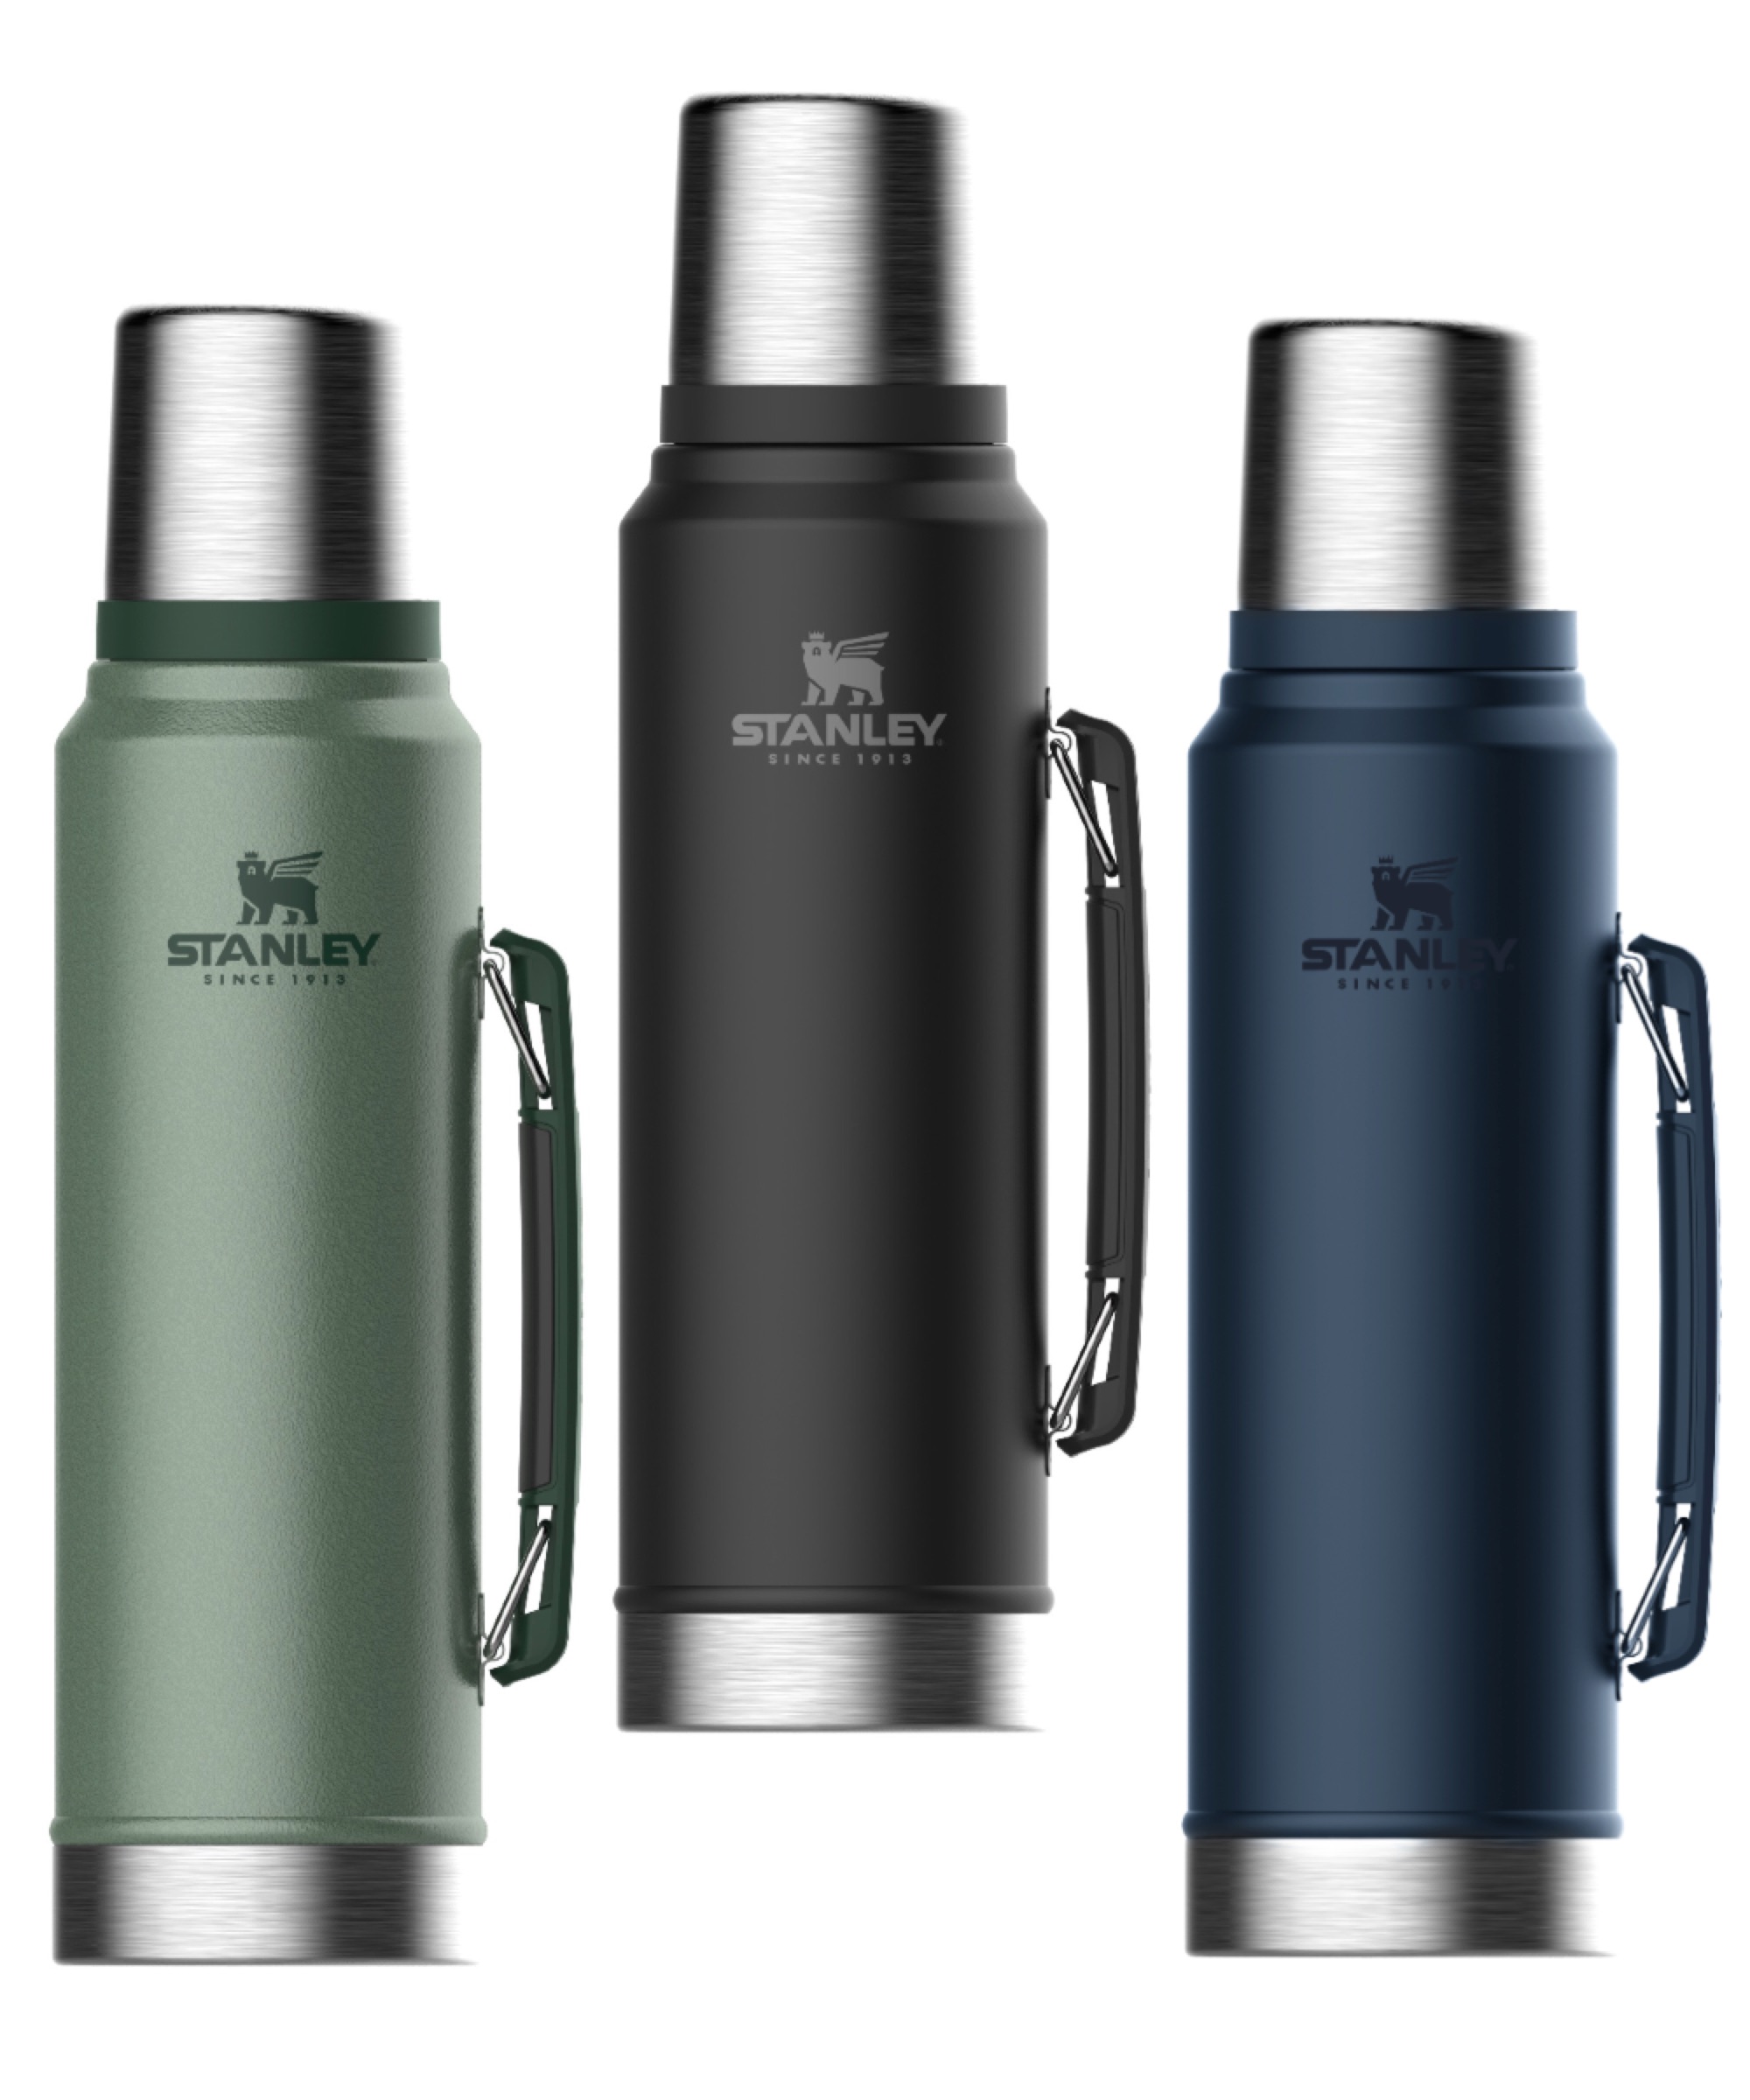 http://www.traveluniverse.com.au/Shared/Images/Product/Stanley-1-Litre-Classic-Vacuum-Insulated-Bottle/88413-group.jpg